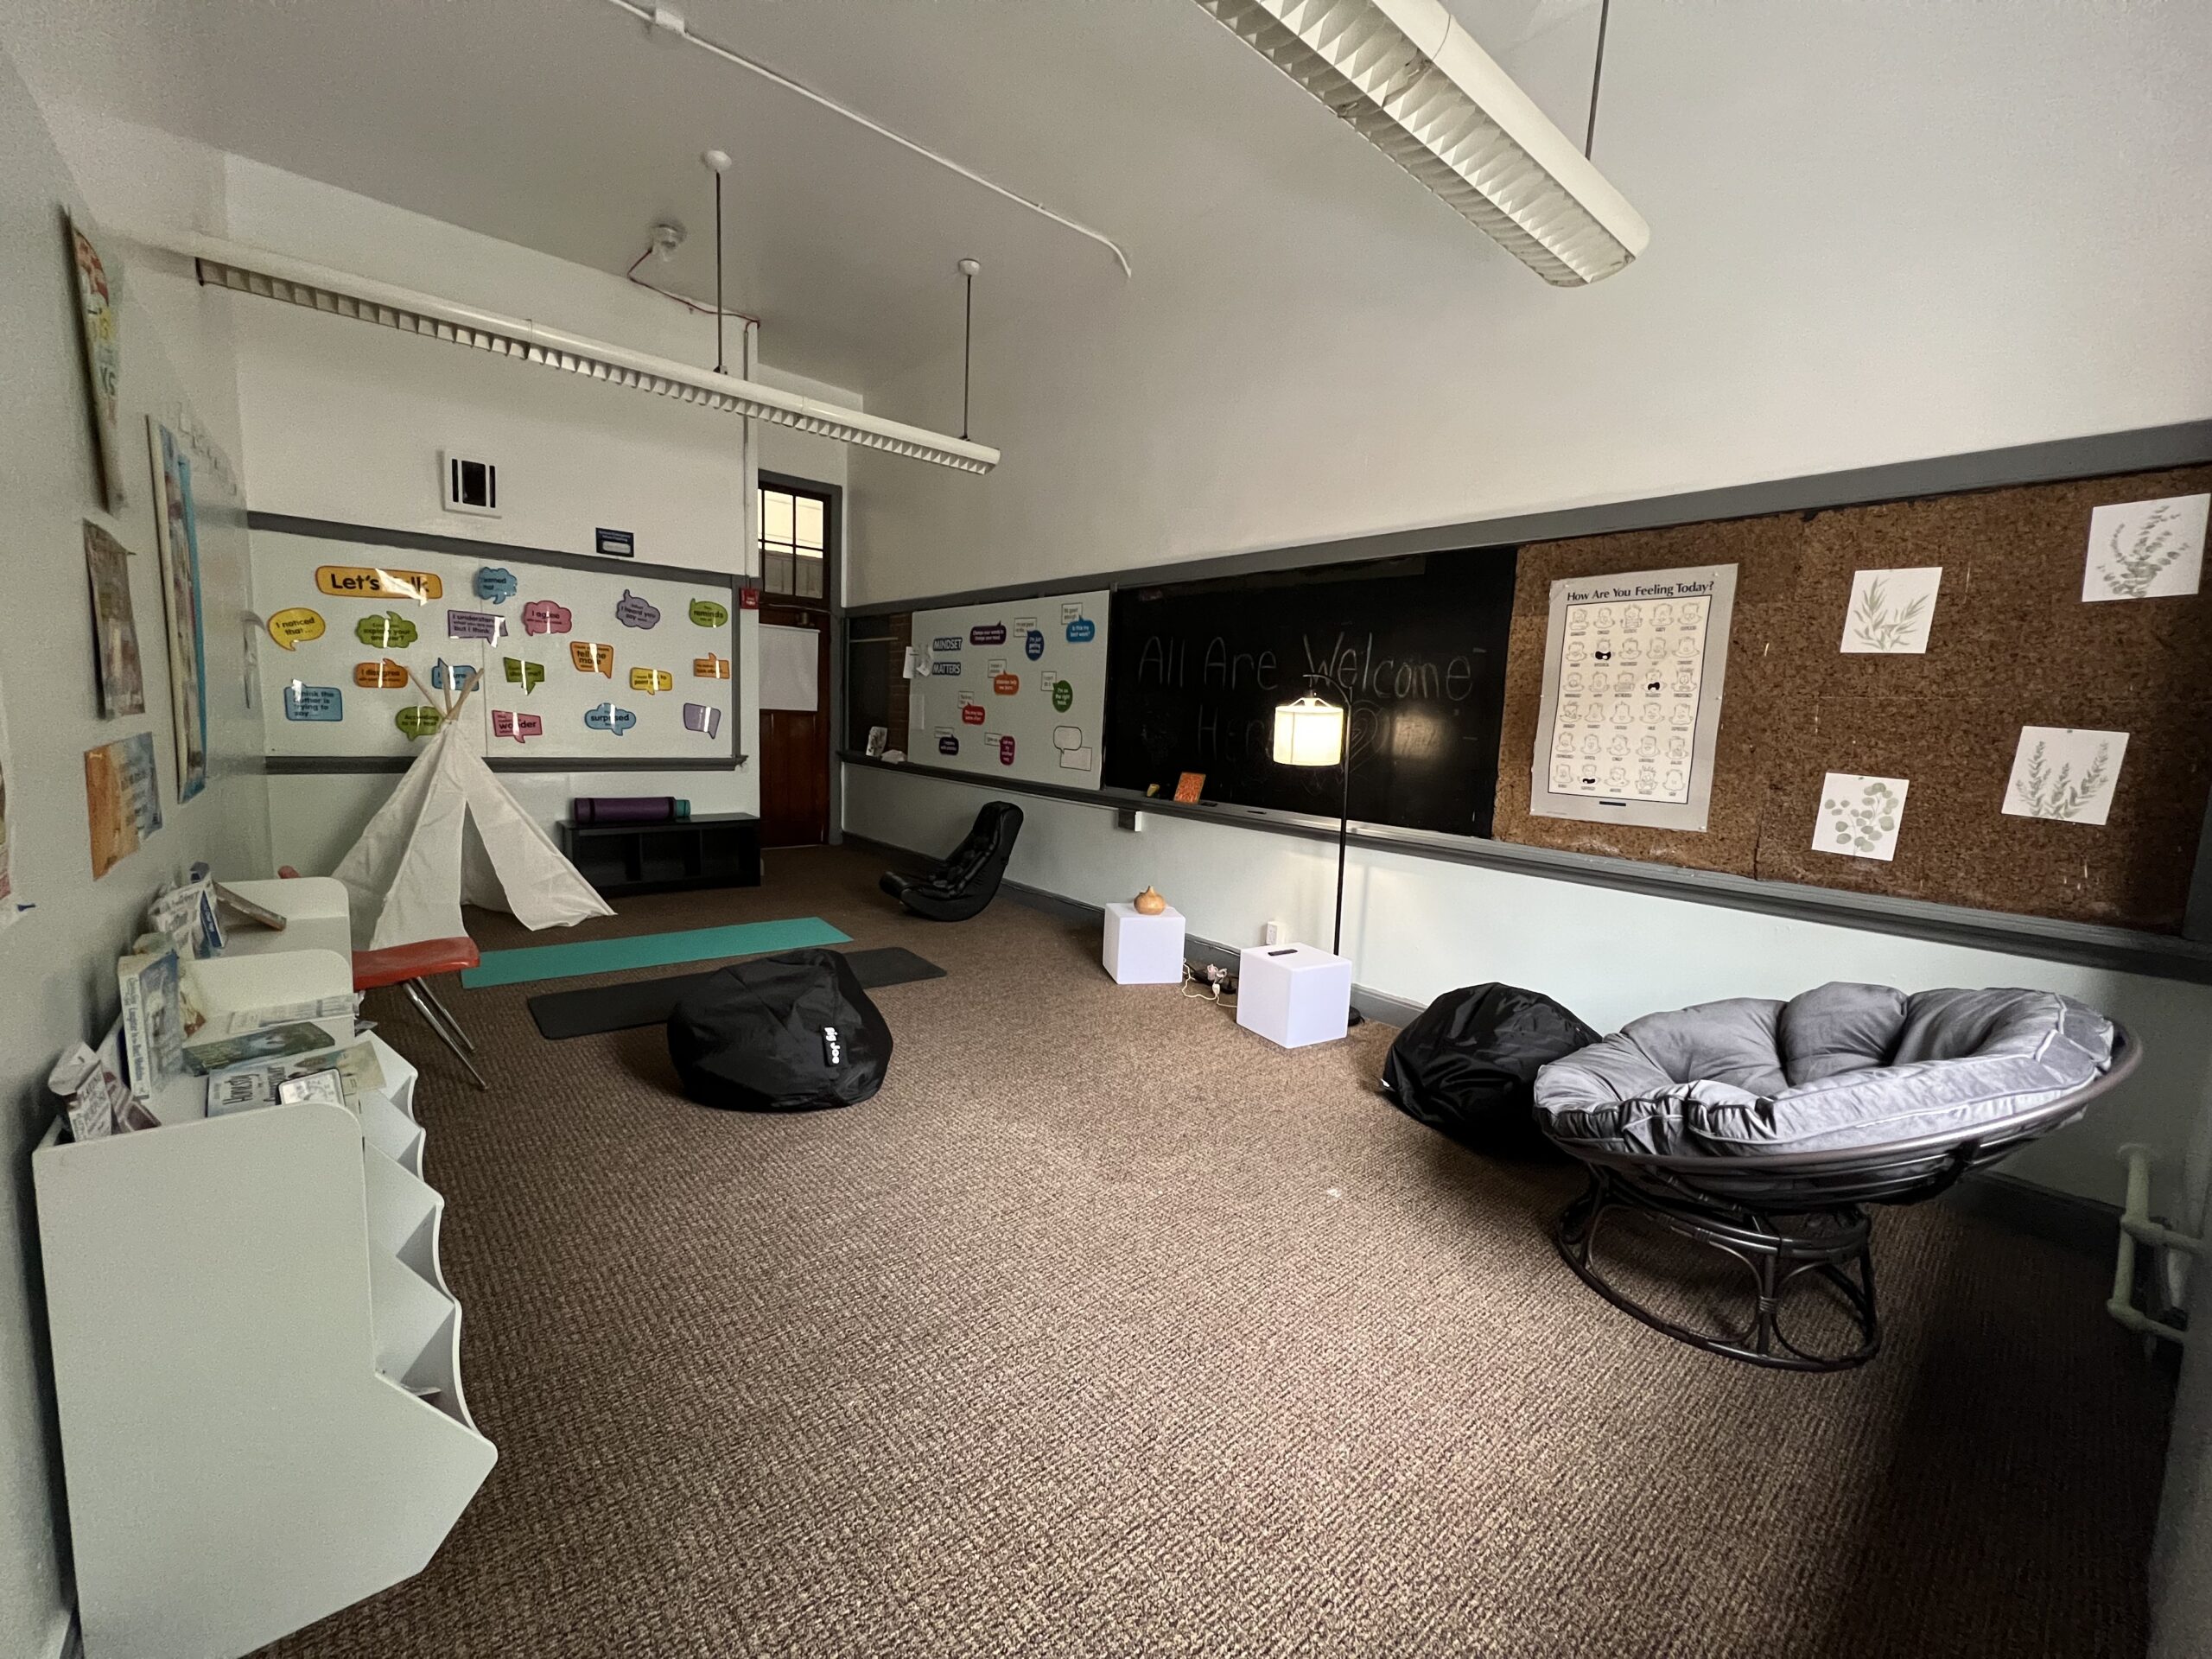 A small multisensory room with brown carpeting, yoga mats, beanbags, large circular chair & small cubbies with books. The bulletin boards are decorated with posters.